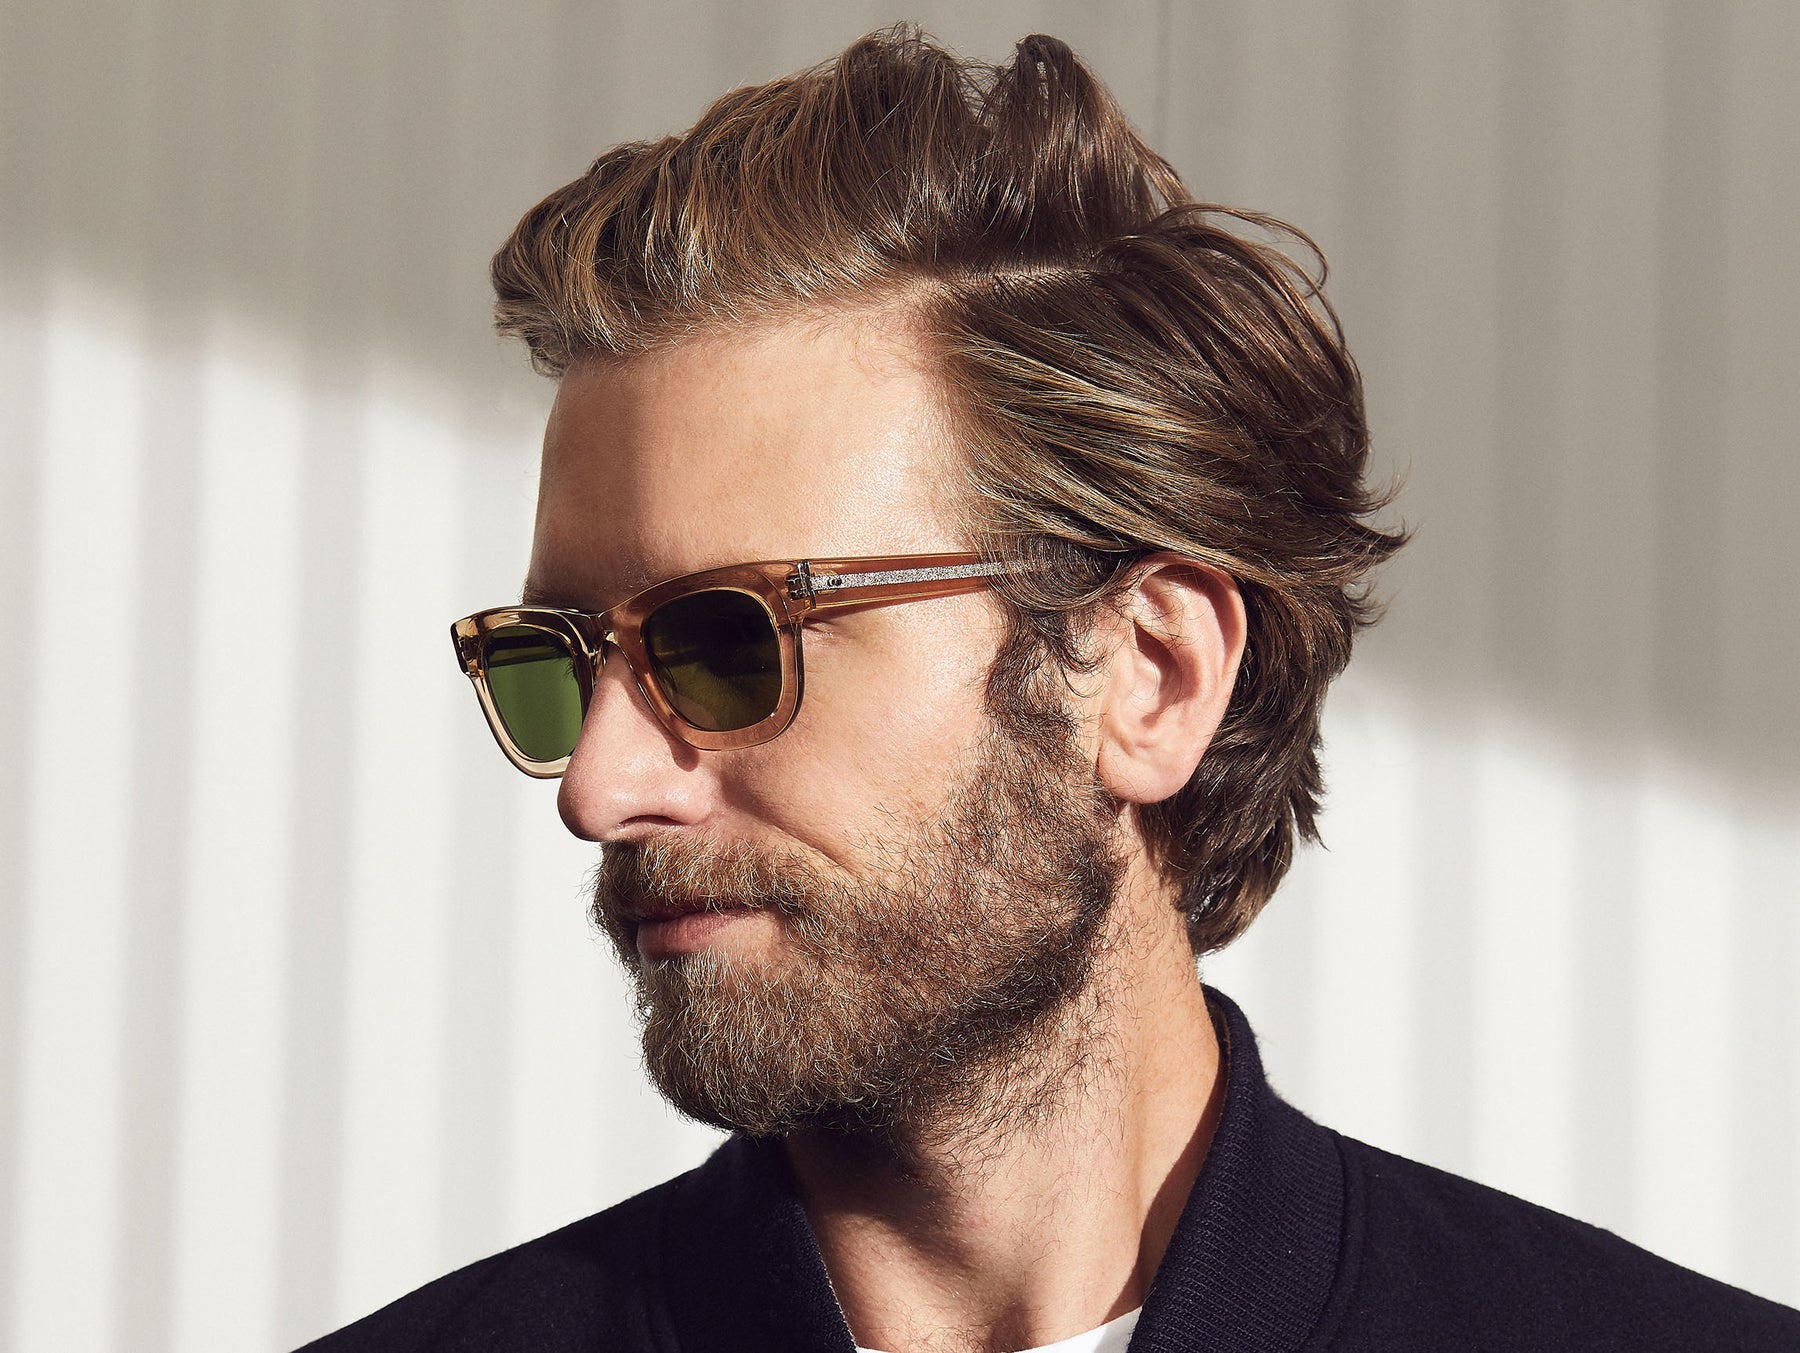 Model is wearing the FRITZ SUN in Cinnamon/Flesh in size 44 with Calibar Green Glass Lenses